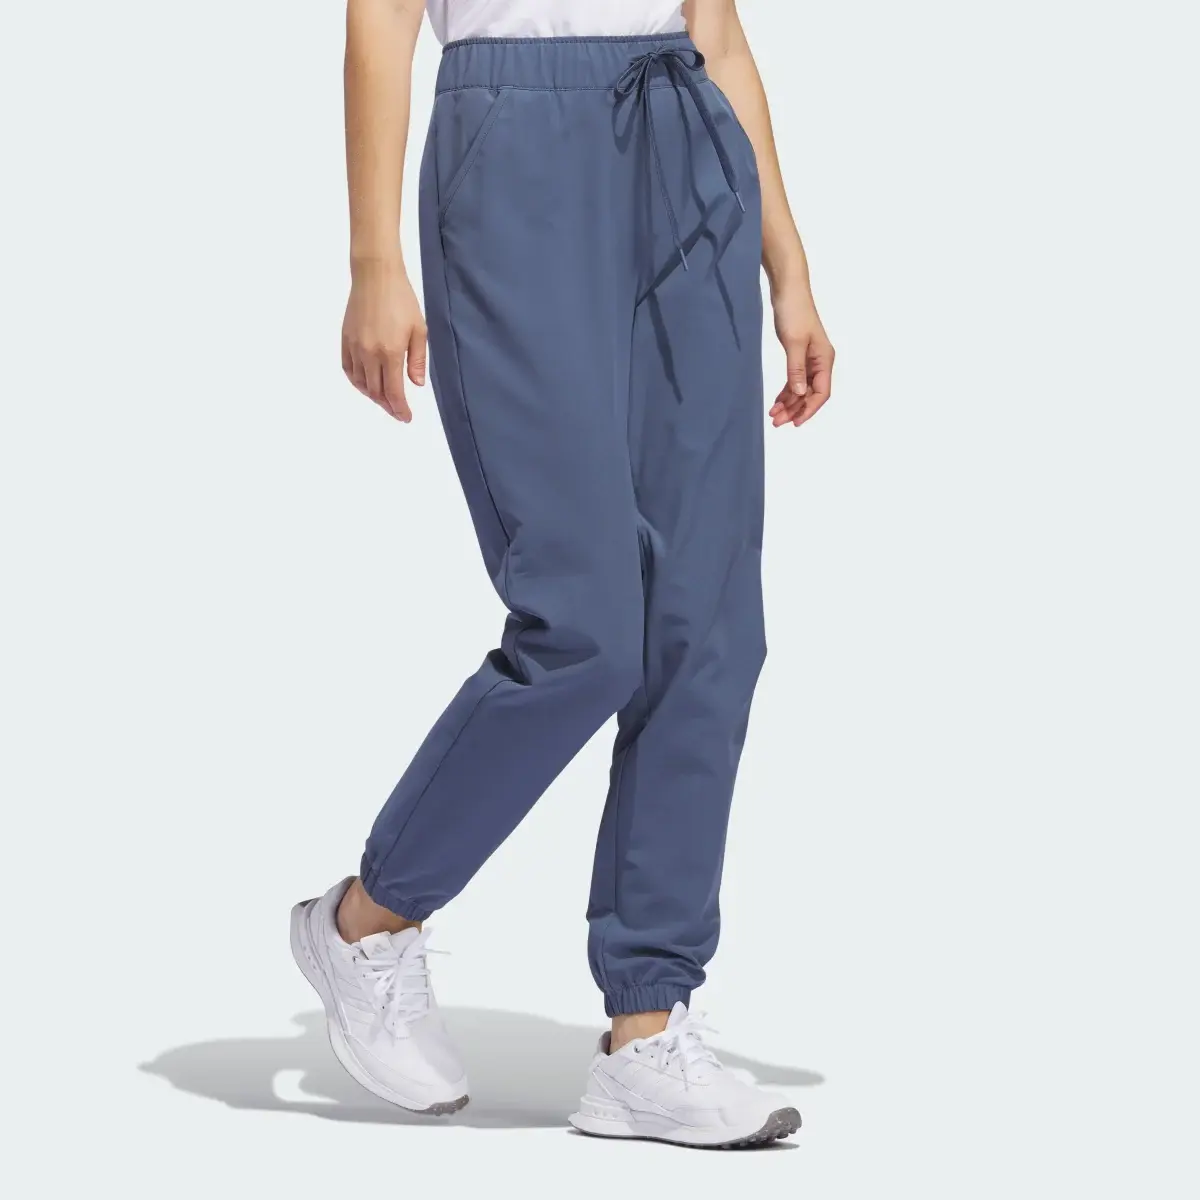 Adidas Women's Ultimate365 Joggers. 3